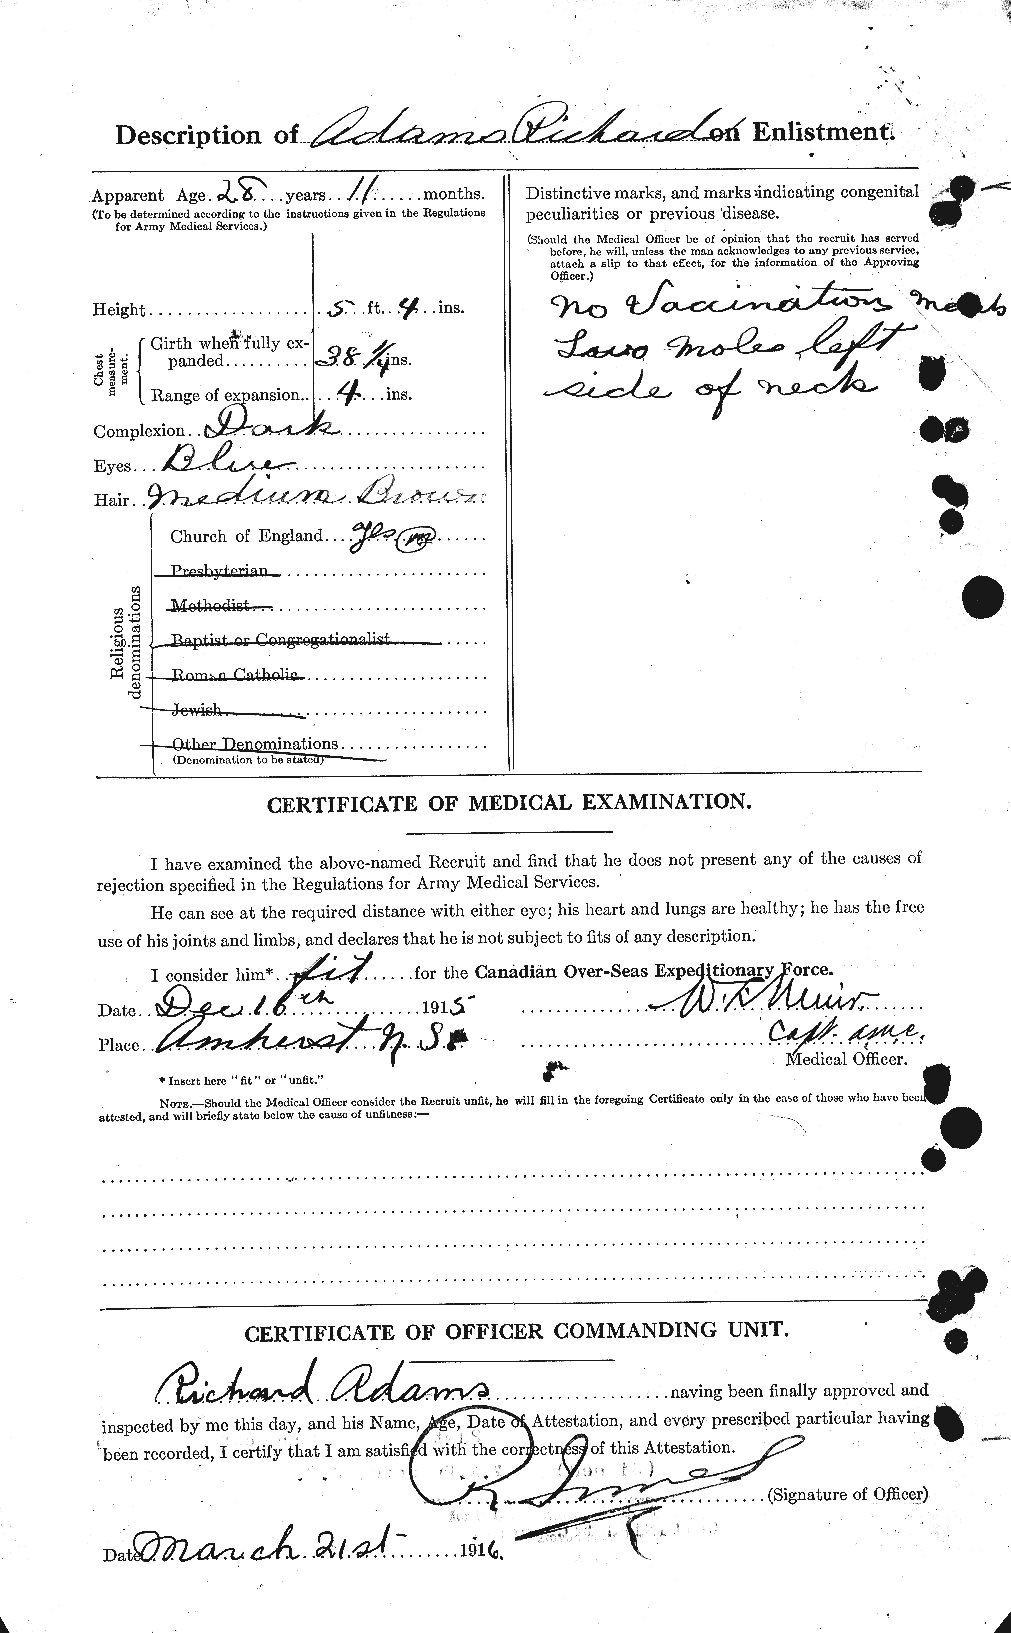 Personnel Records of the First World War - CEF 202025b